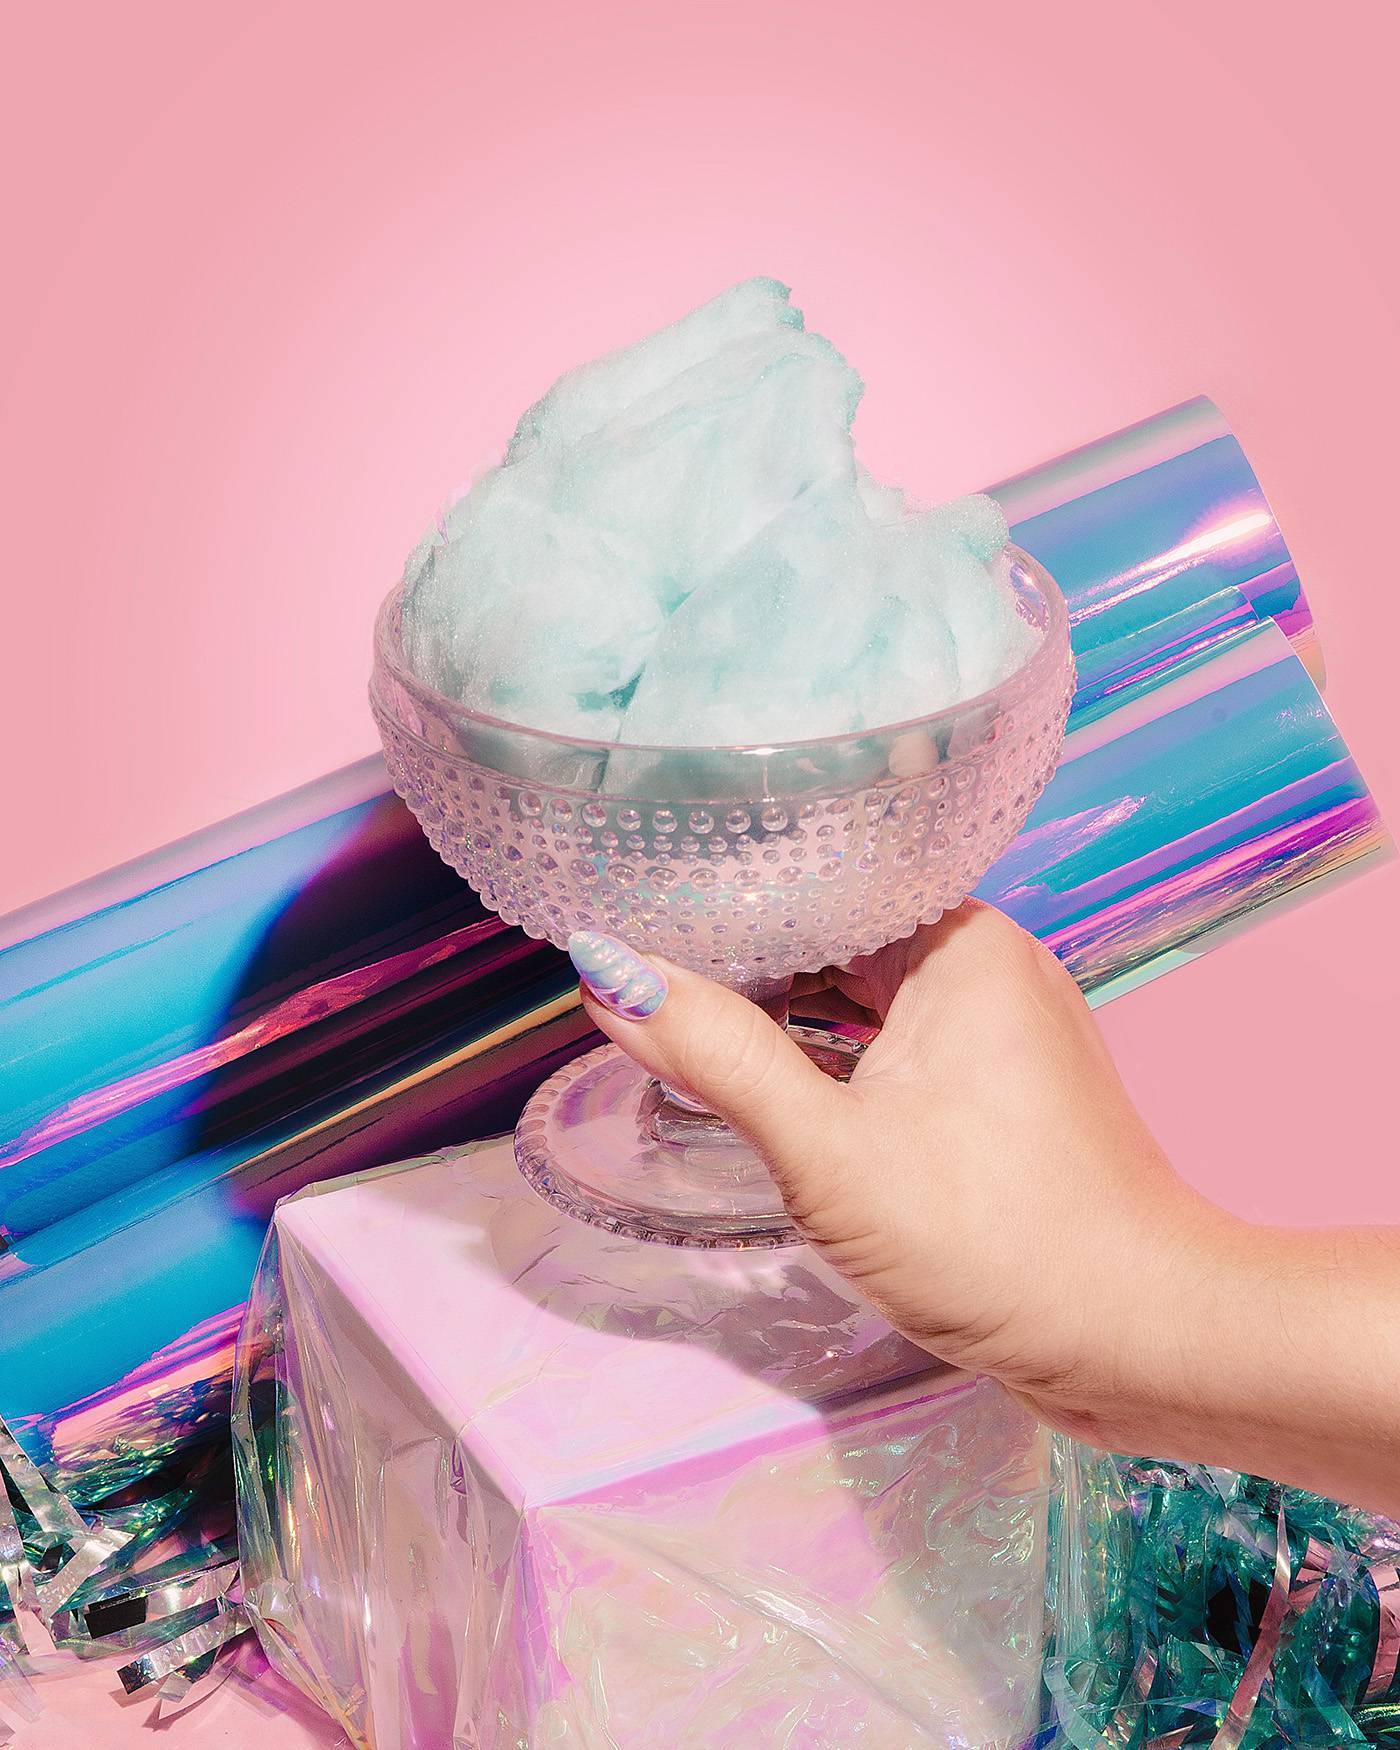 Iridescent ice cream glass holding blue cotton candy with blue sparkling streamers and holographic paper rolls. One caucasian hand holding glass with mermaid nail.